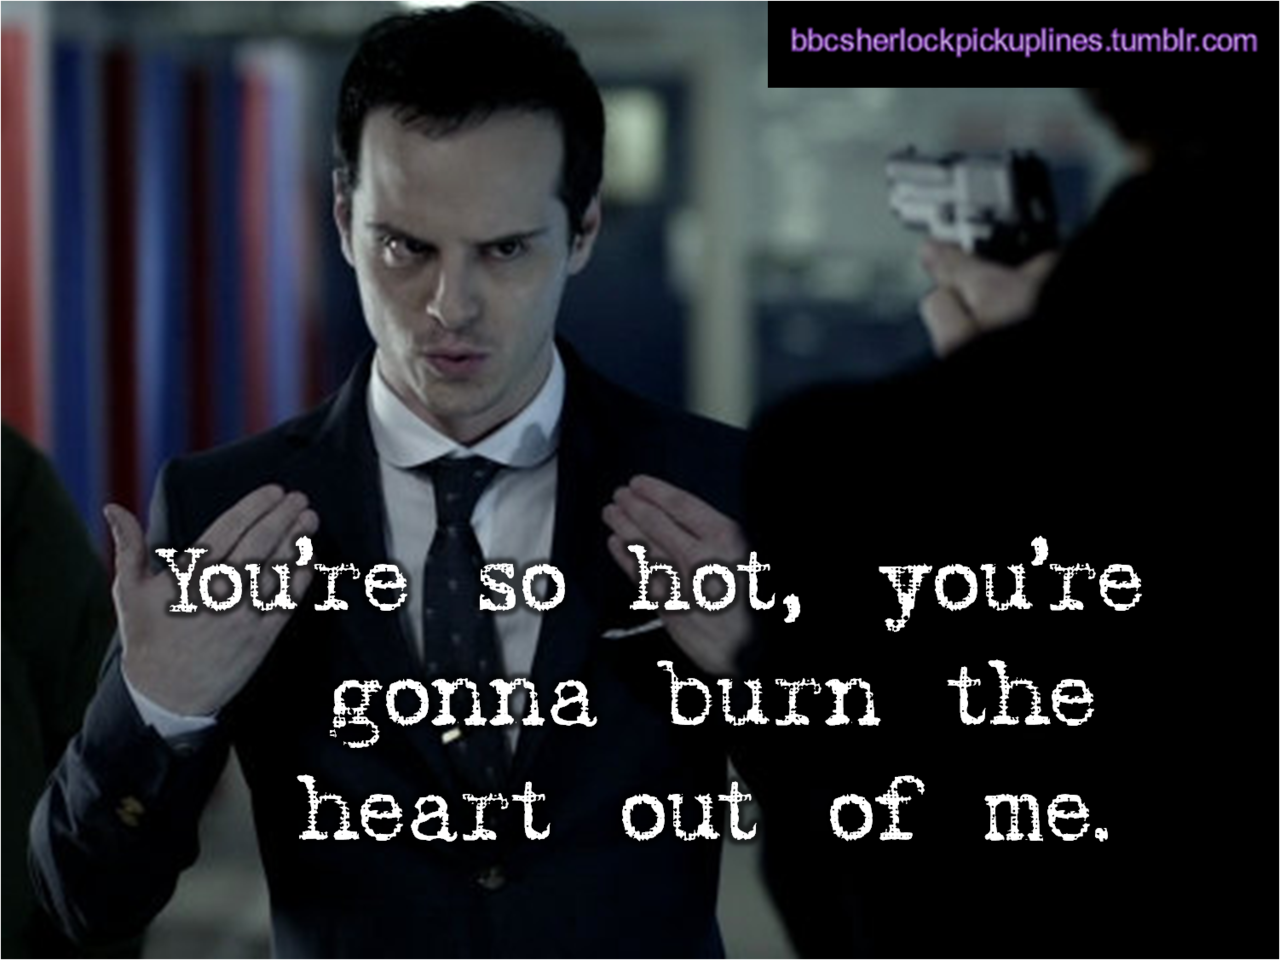 The best of Jim Moriarty, from BBC Sherlock pick-up lines.